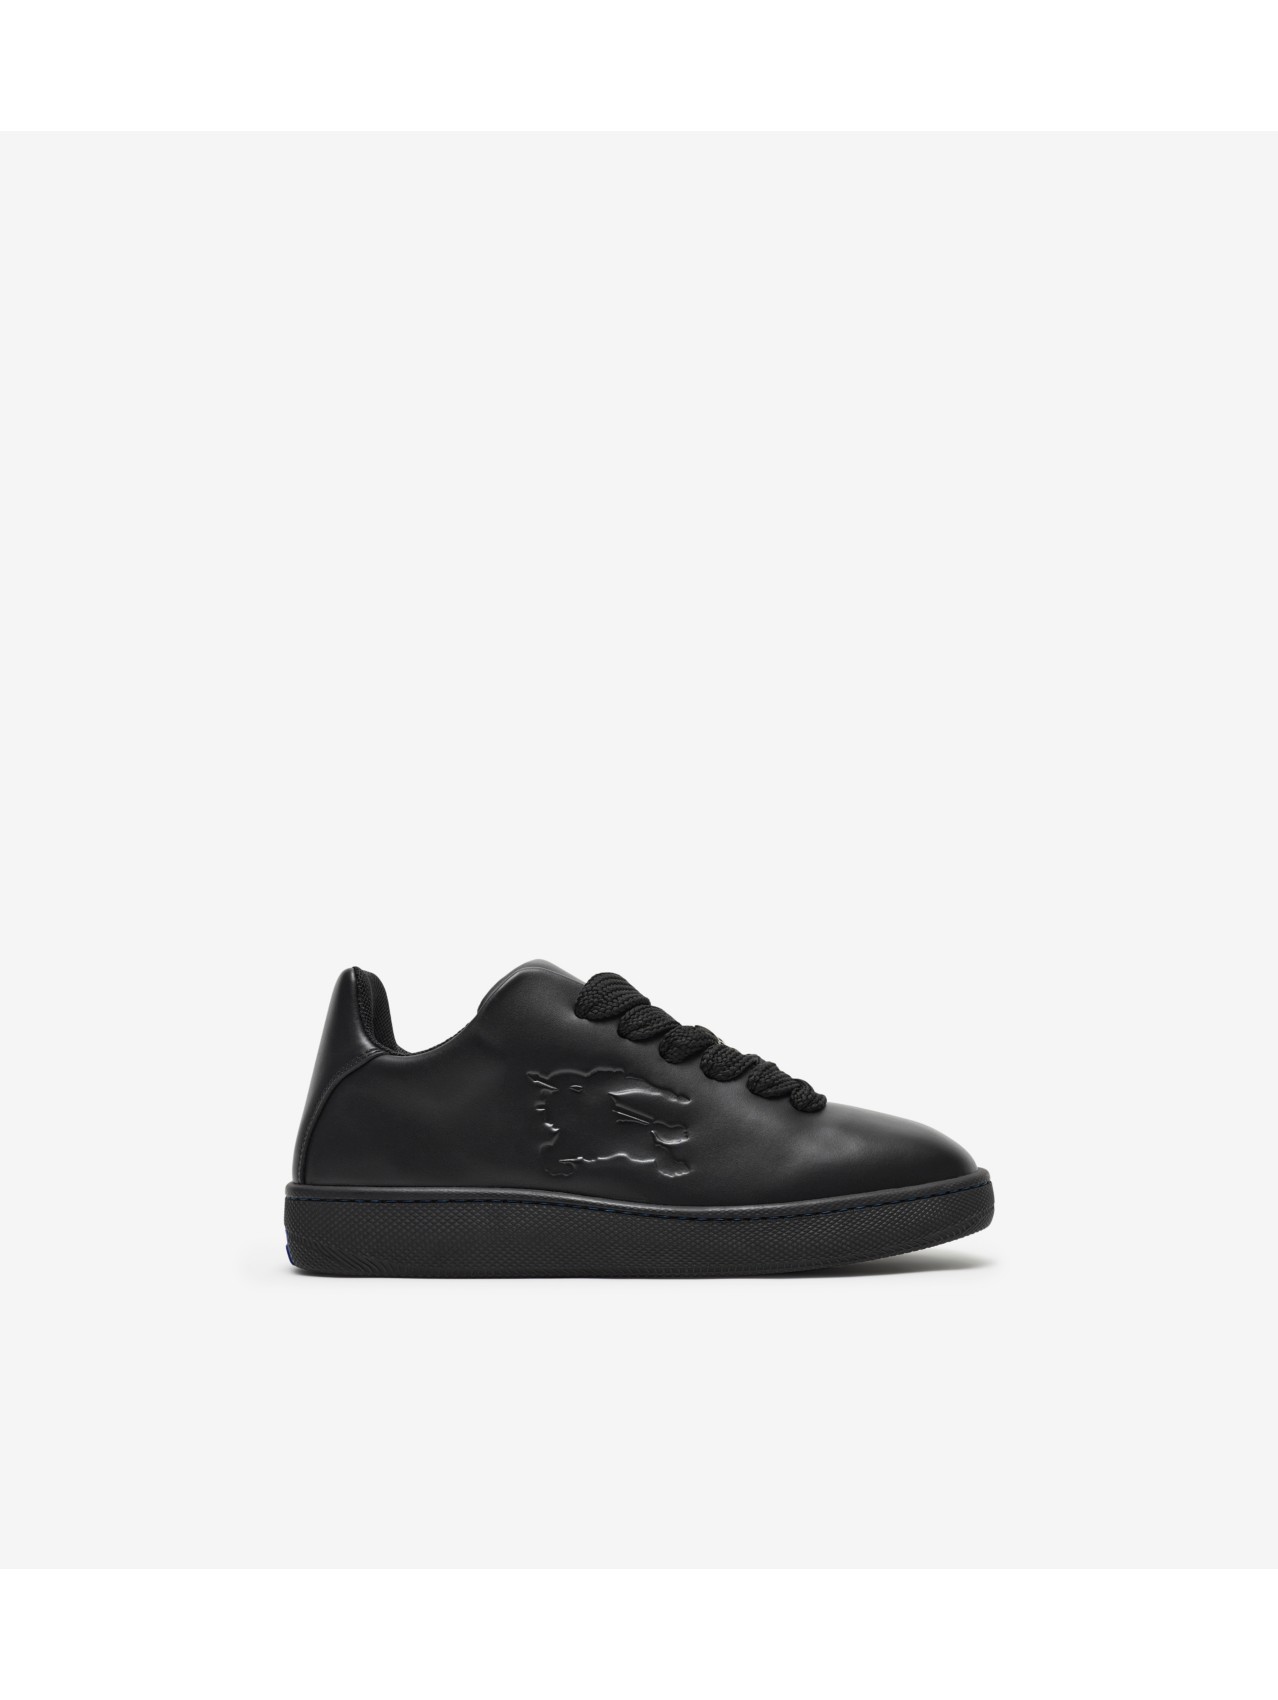 Leather Box Sneakers in Black - Men | Burberry® Official